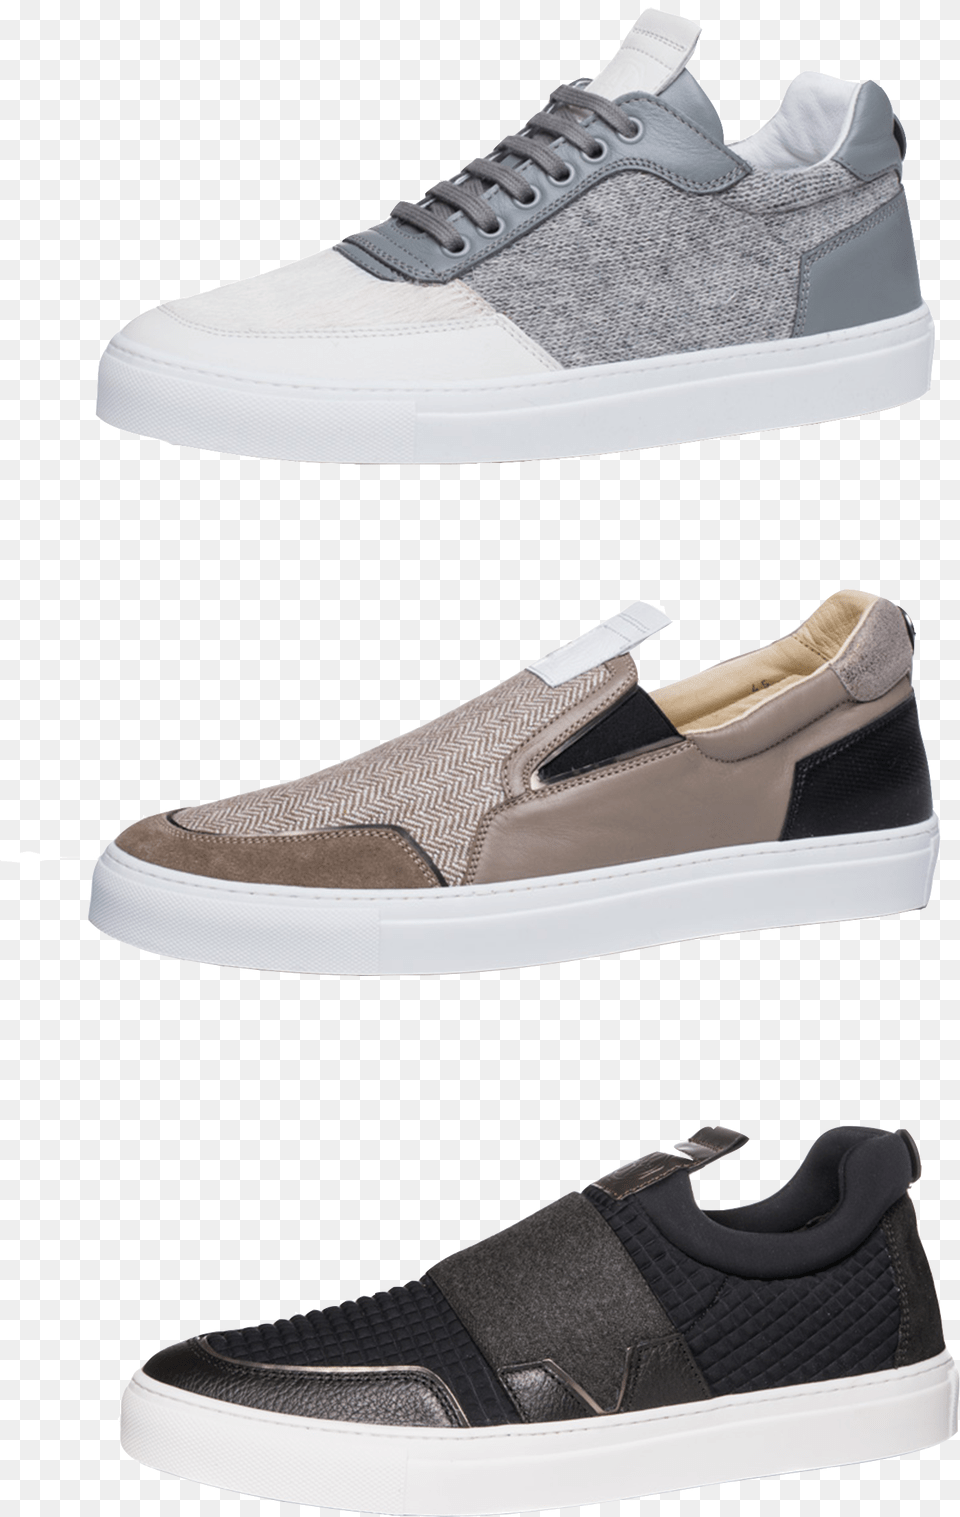 Coachella Shoes For Guys Download Coachella Shoes For Guys, Clothing, Footwear, Shoe, Sneaker Free Transparent Png